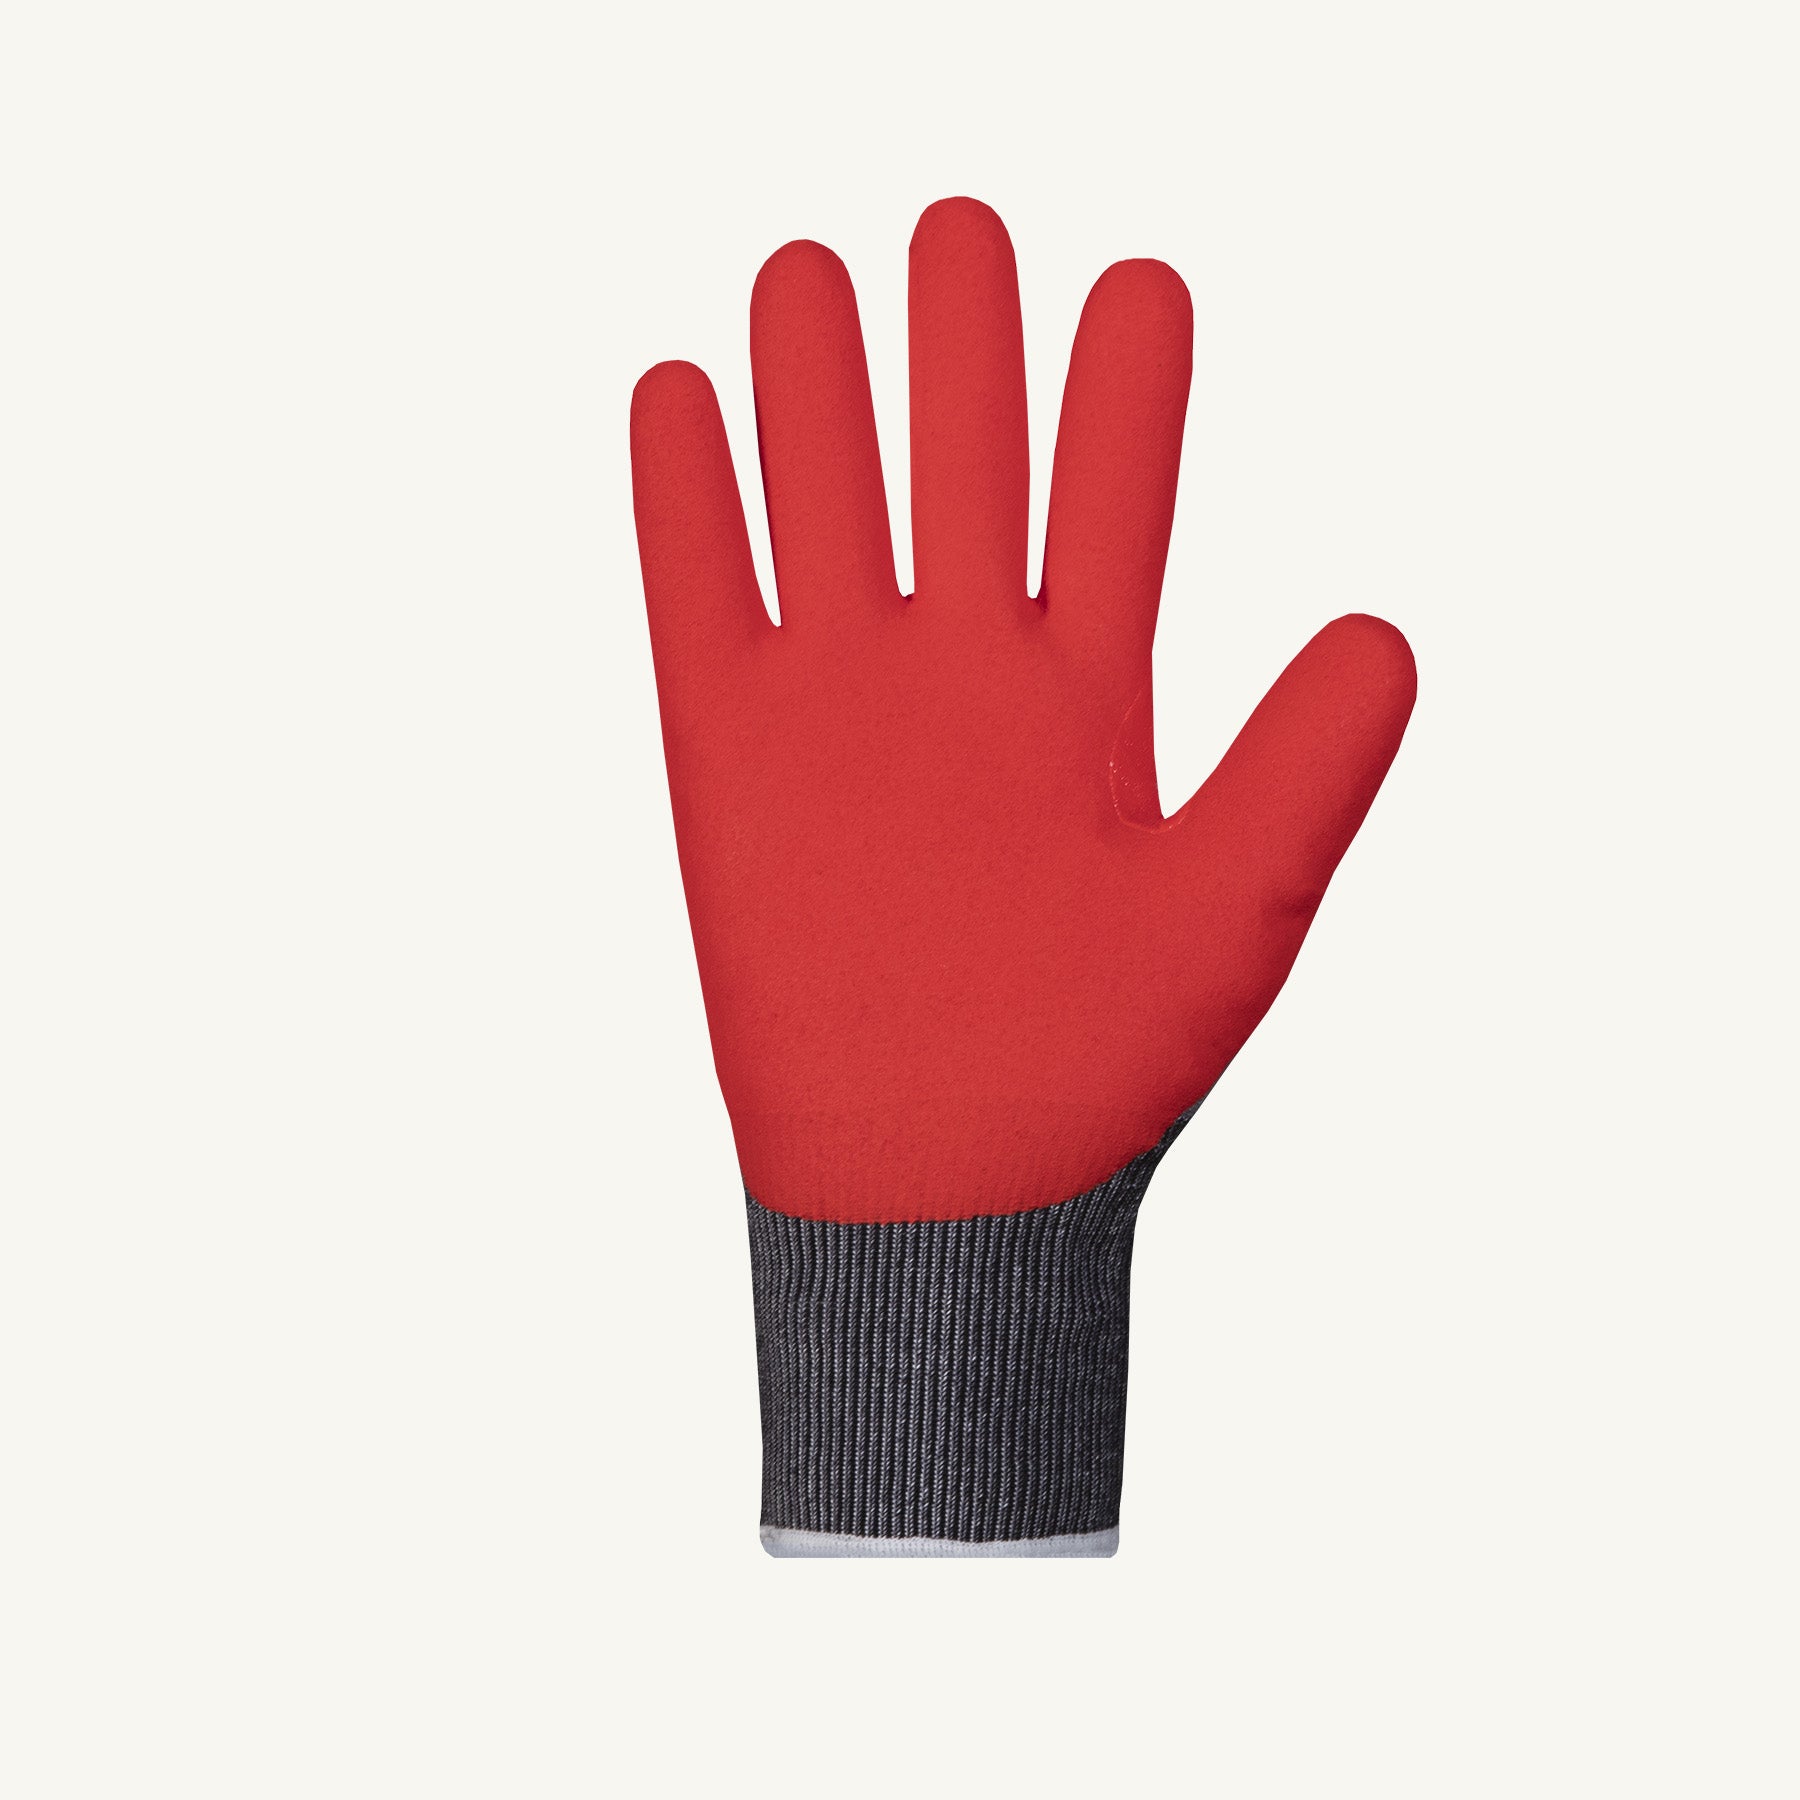 Superior TenActiv™ 18-Gauge Nitrile Palm Terry Lined Glove with Waterproof Membrane